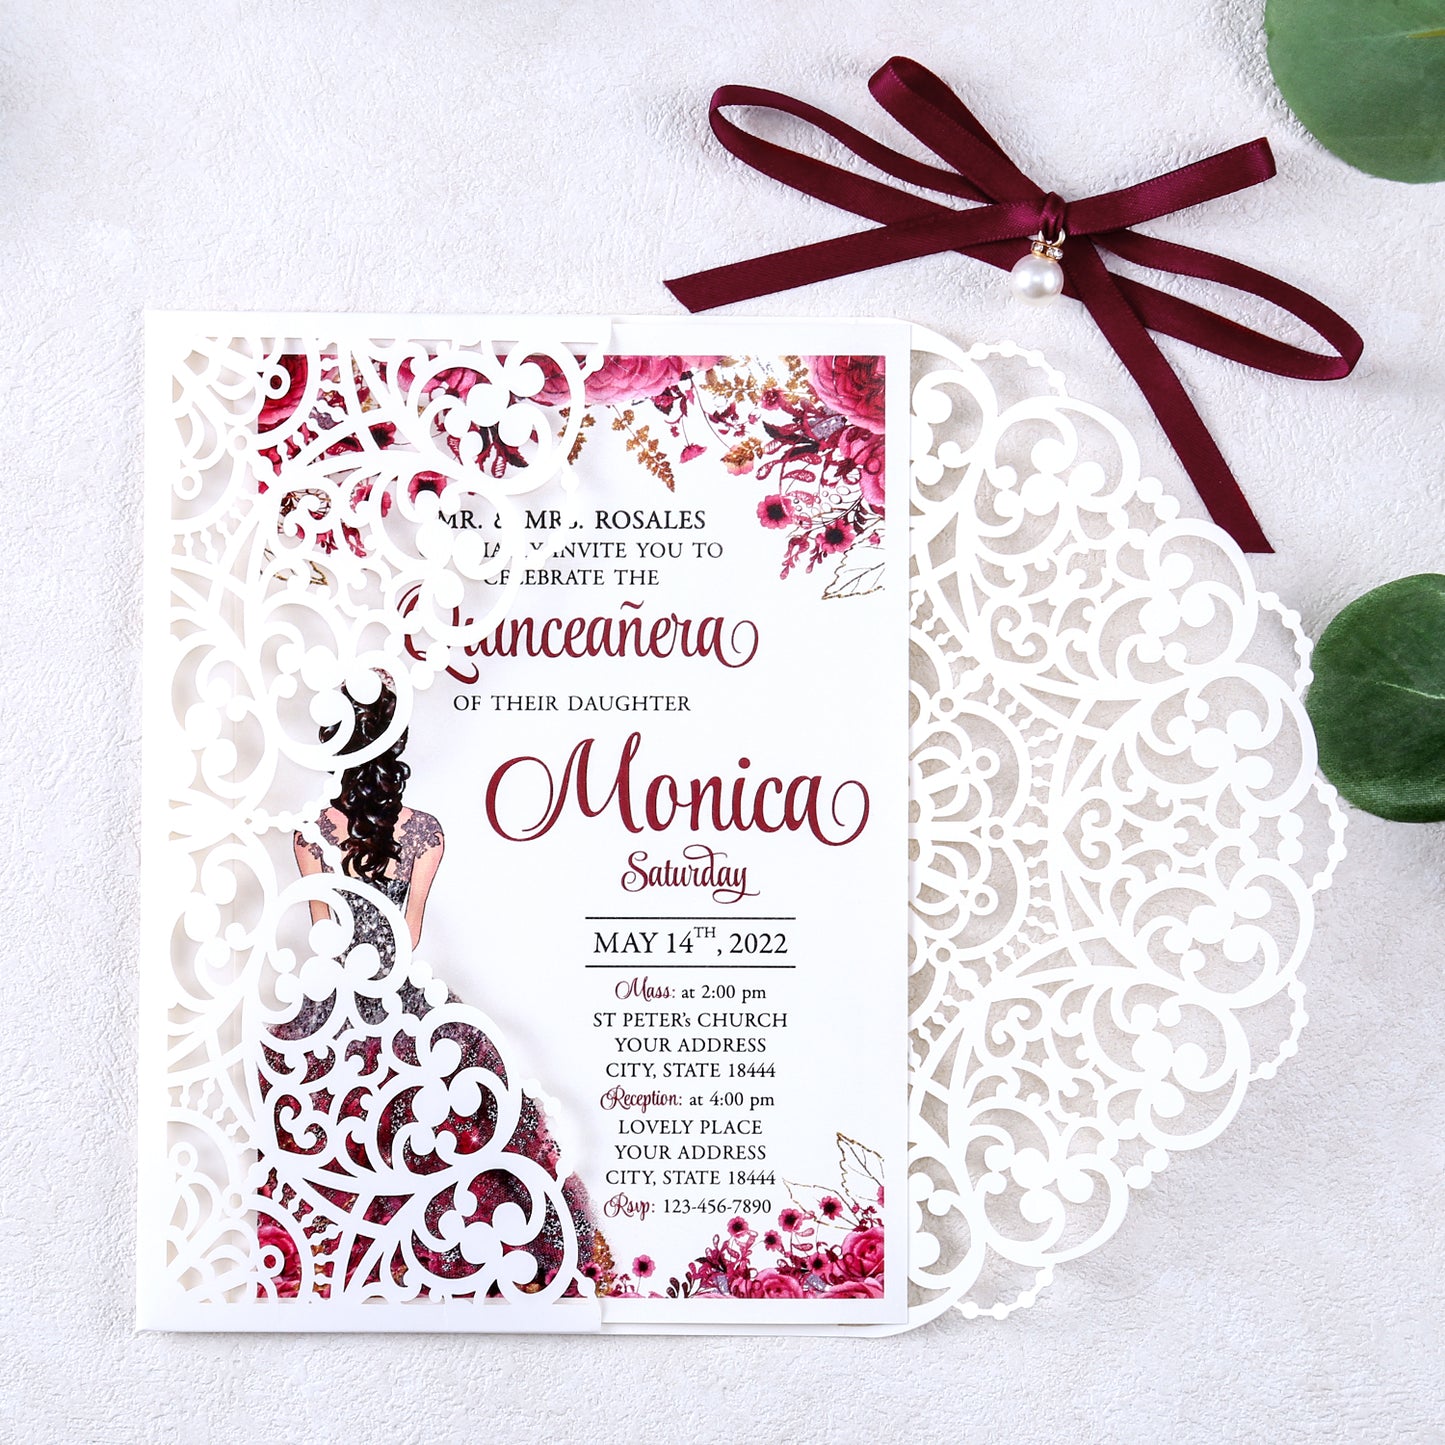 5 X 7.2" Laser Cut Hollow Rose Wedding invitations Cards With Burgundy Ribbon And Envelopes For Quinceanera Sweet 15 Invite - DorisHome